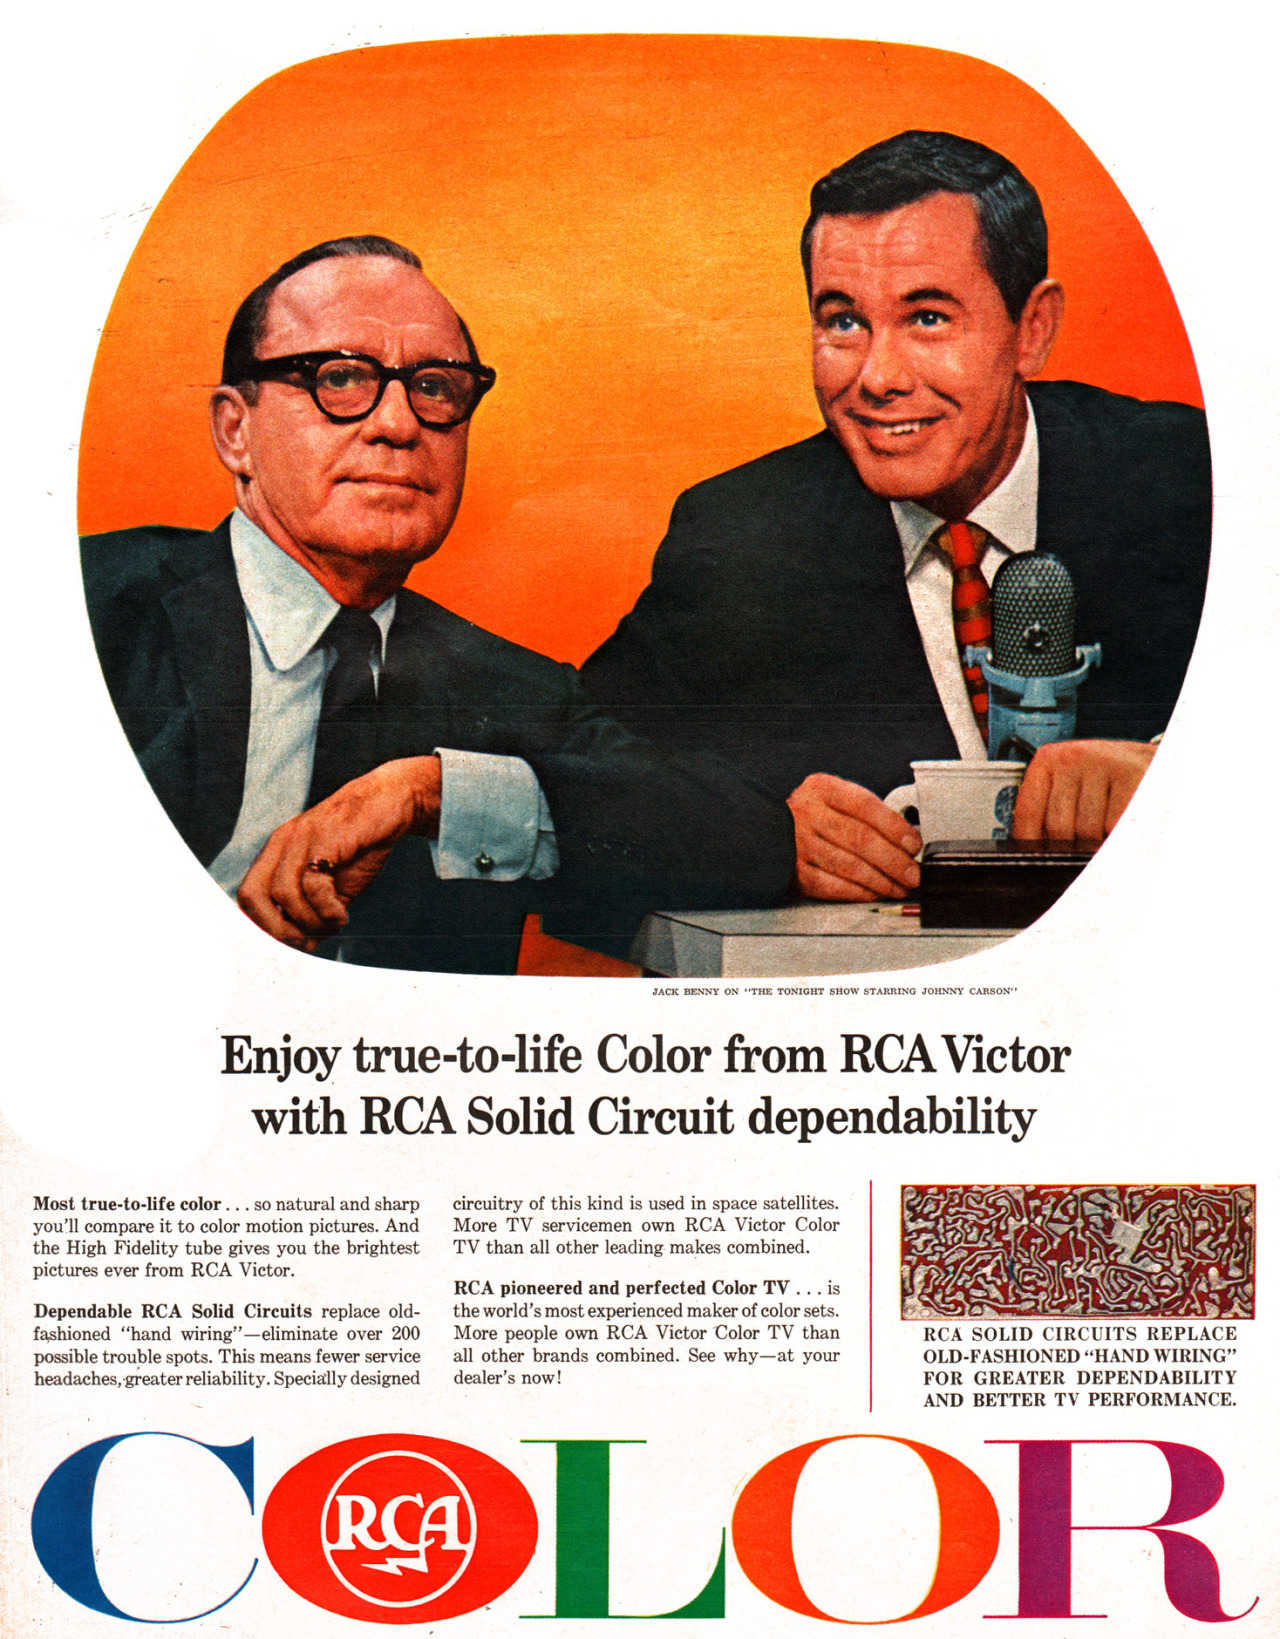 RCA featuring Jack Benny and Johnny Carson - 1965